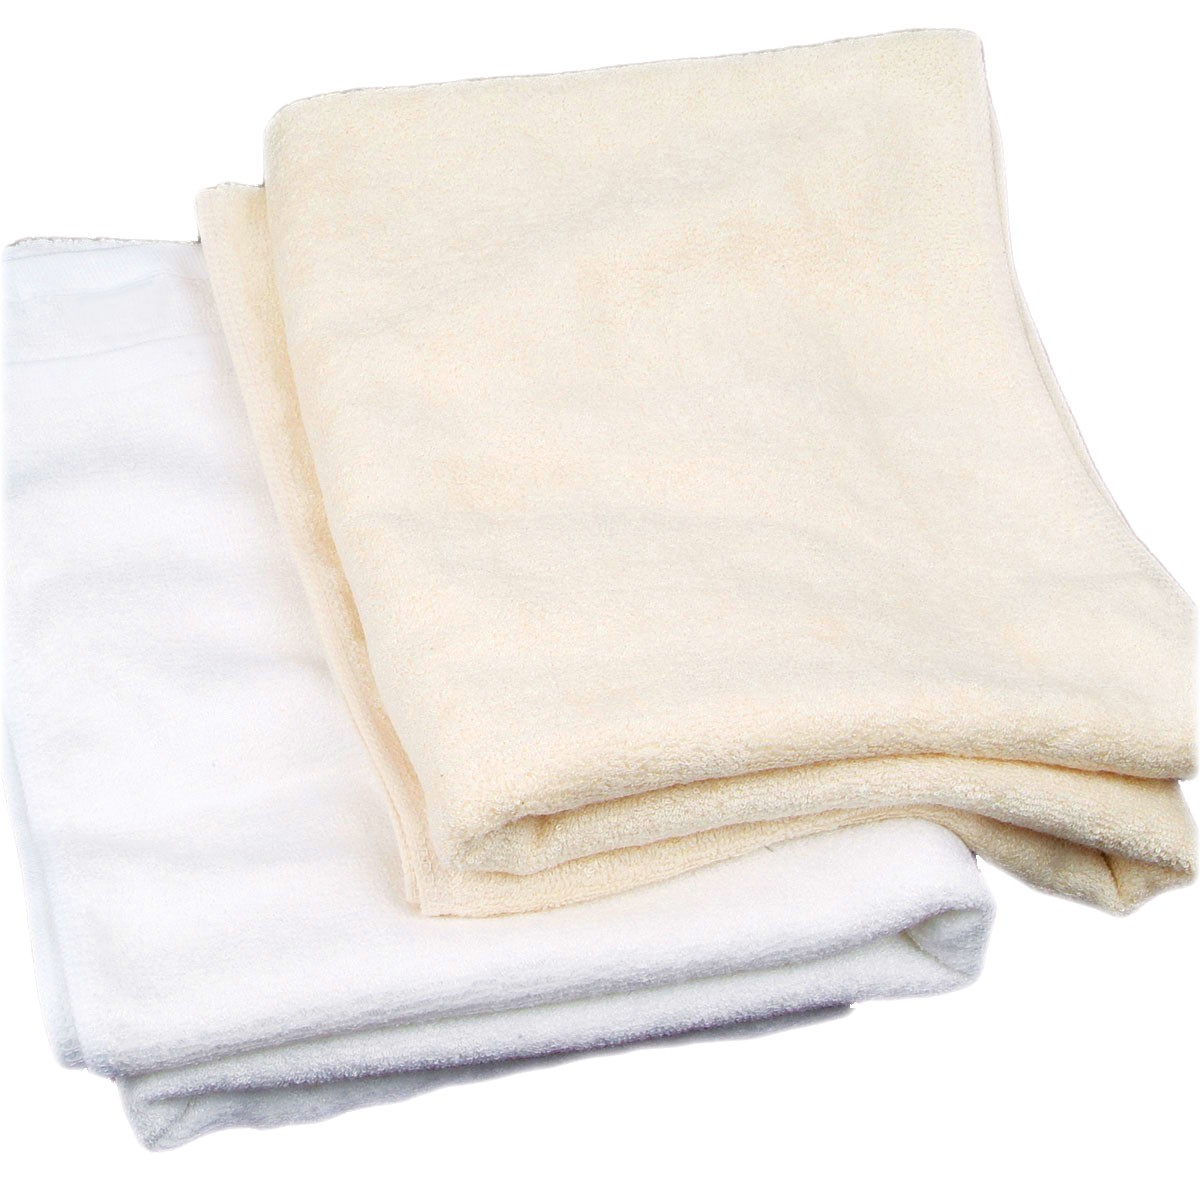 10PCS Eco-Bamboo Towels Antibacterial and Luxuriously Soft - Lowest Price Ever!